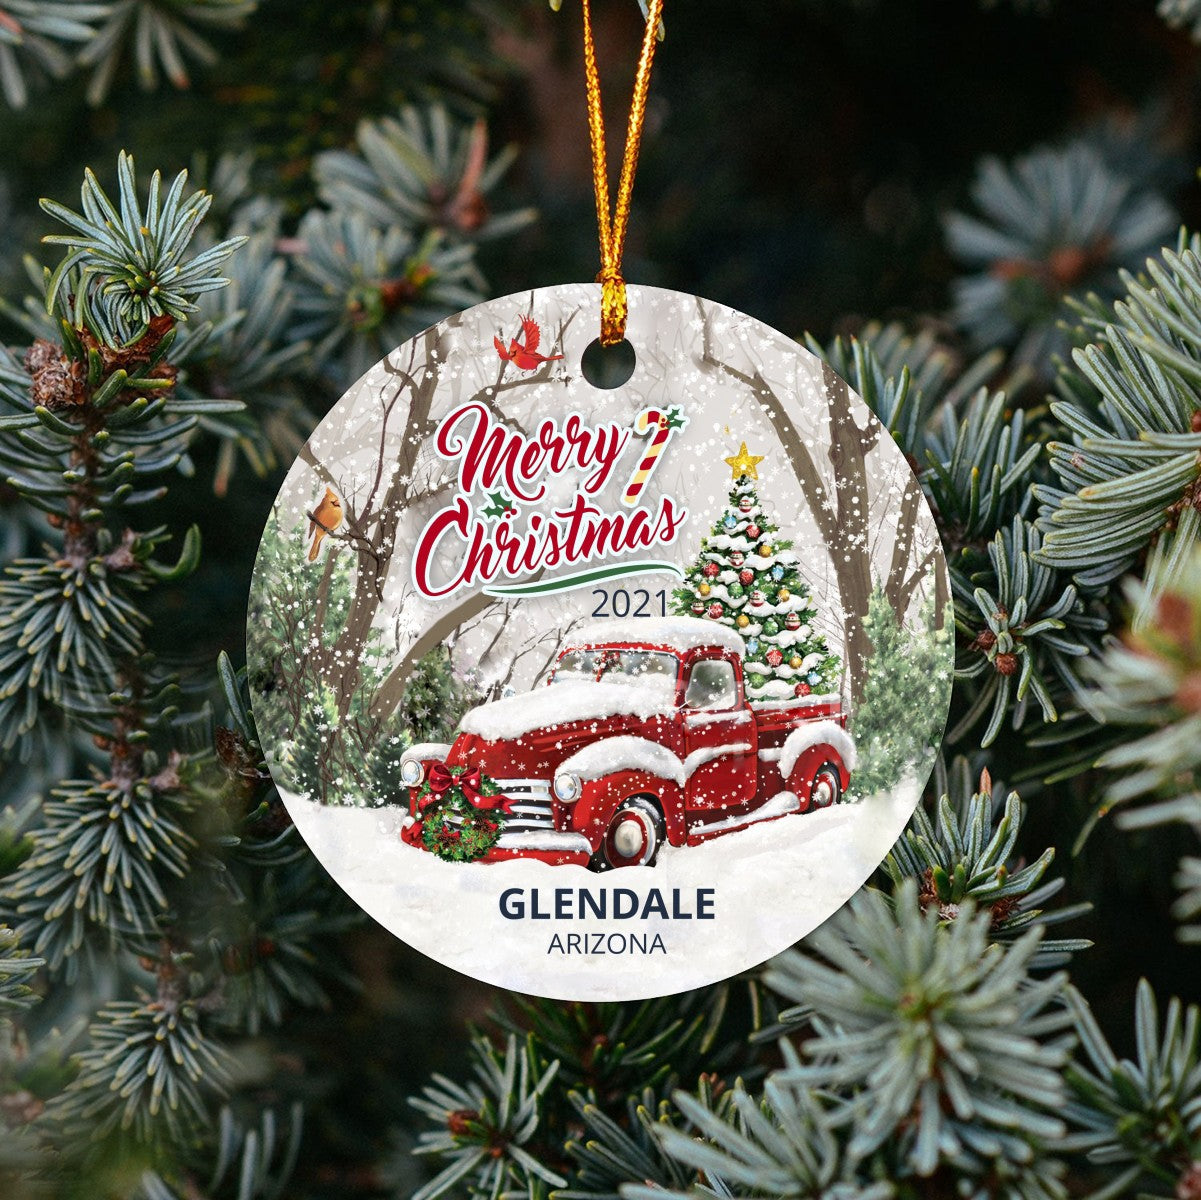 Christmas Tree Ornaments Glendale - Ornament Customize With Name City And State Glendale Arizona AZ - Red Truck Xmas Ornaments 3'' Plastic Gift For Family, Friend And Housewarming